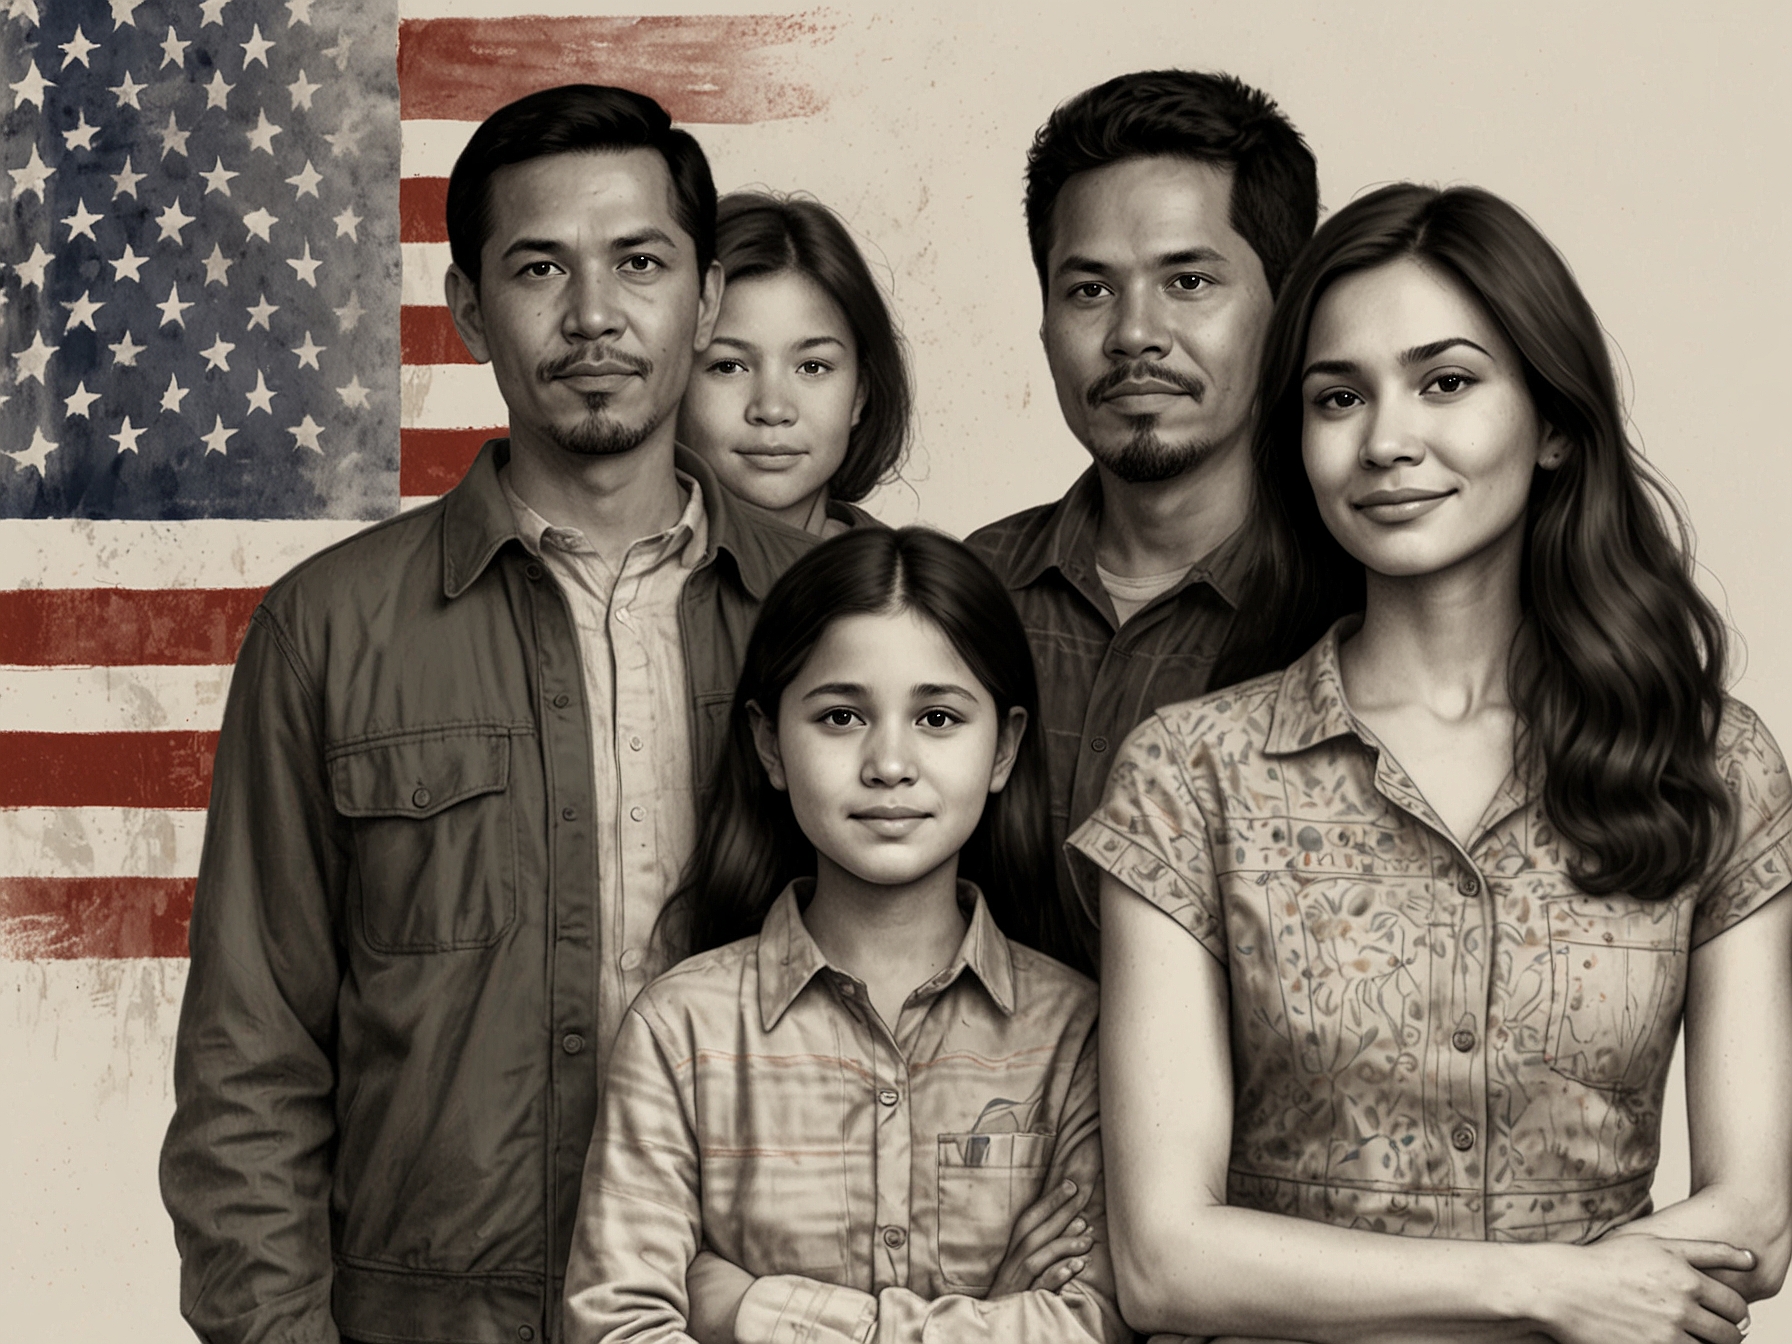 Depiction of a mixed-status family, where one spouse is a U.S. citizen and the other is undocumented, showing relief and unity as they are now protected from deportation under the new policy.